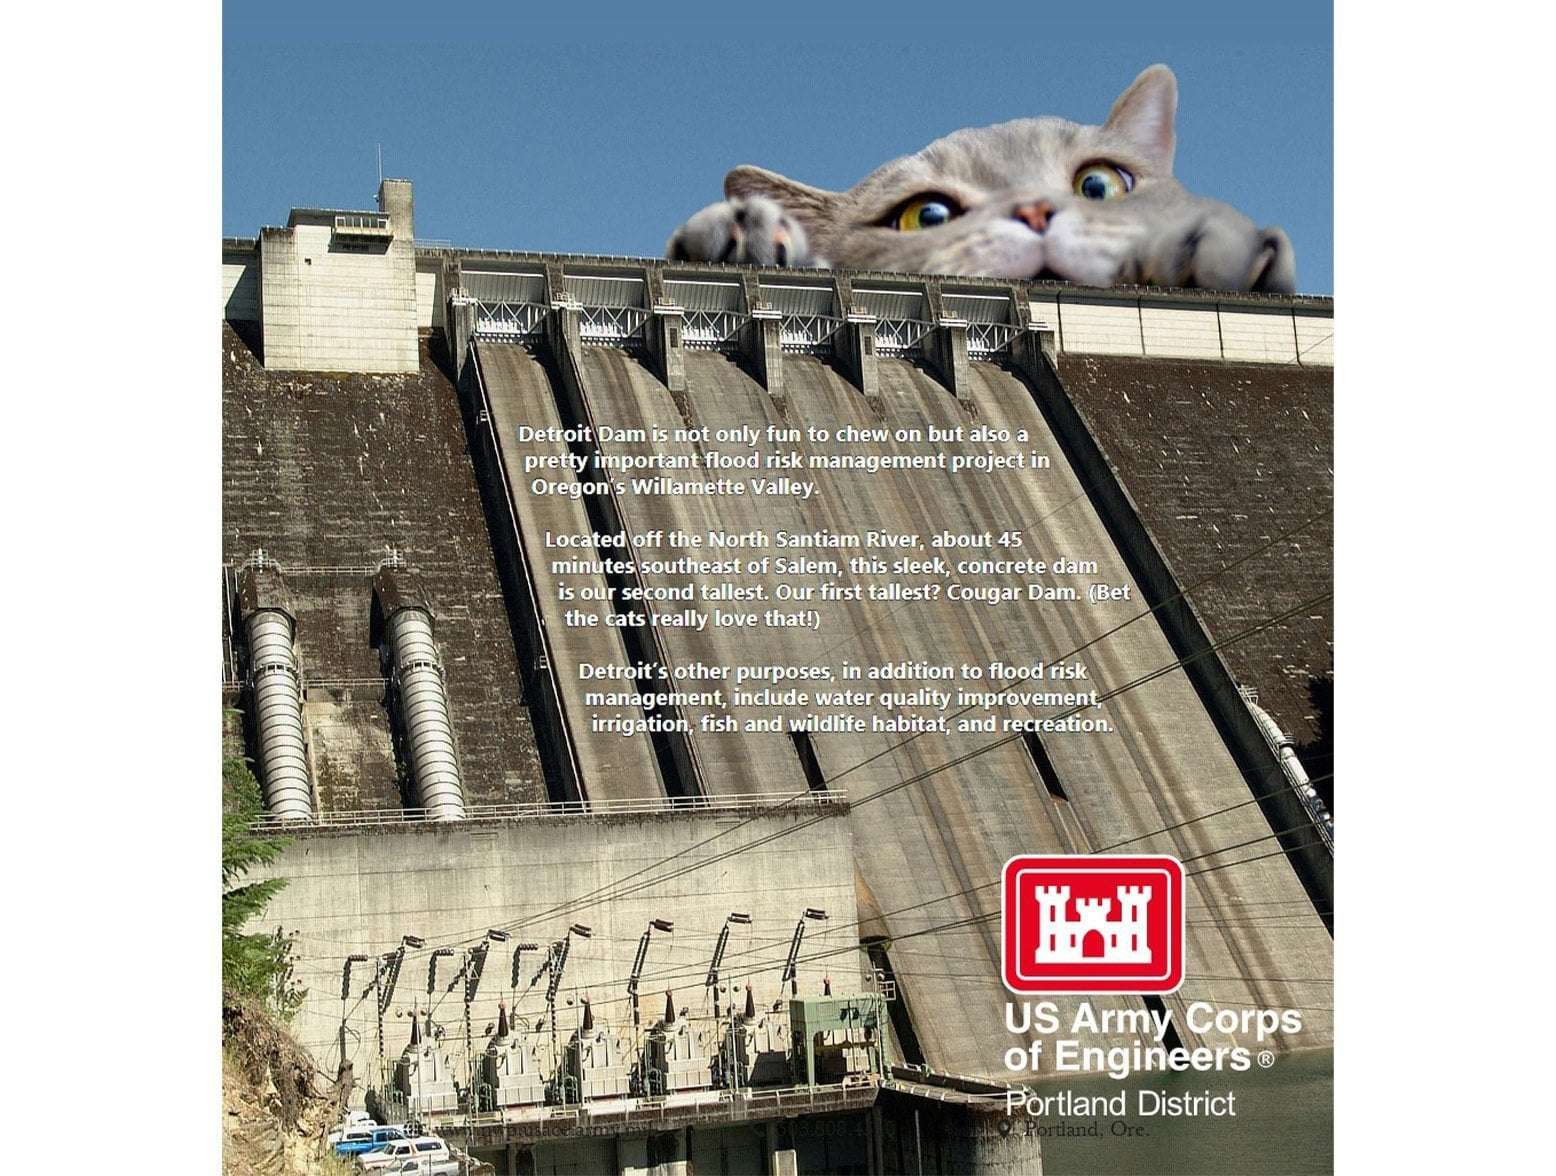 image for The Army Corps Of Engineers Has Released a 2023 Calendar Of Giant Cats Attacking Infrastructure